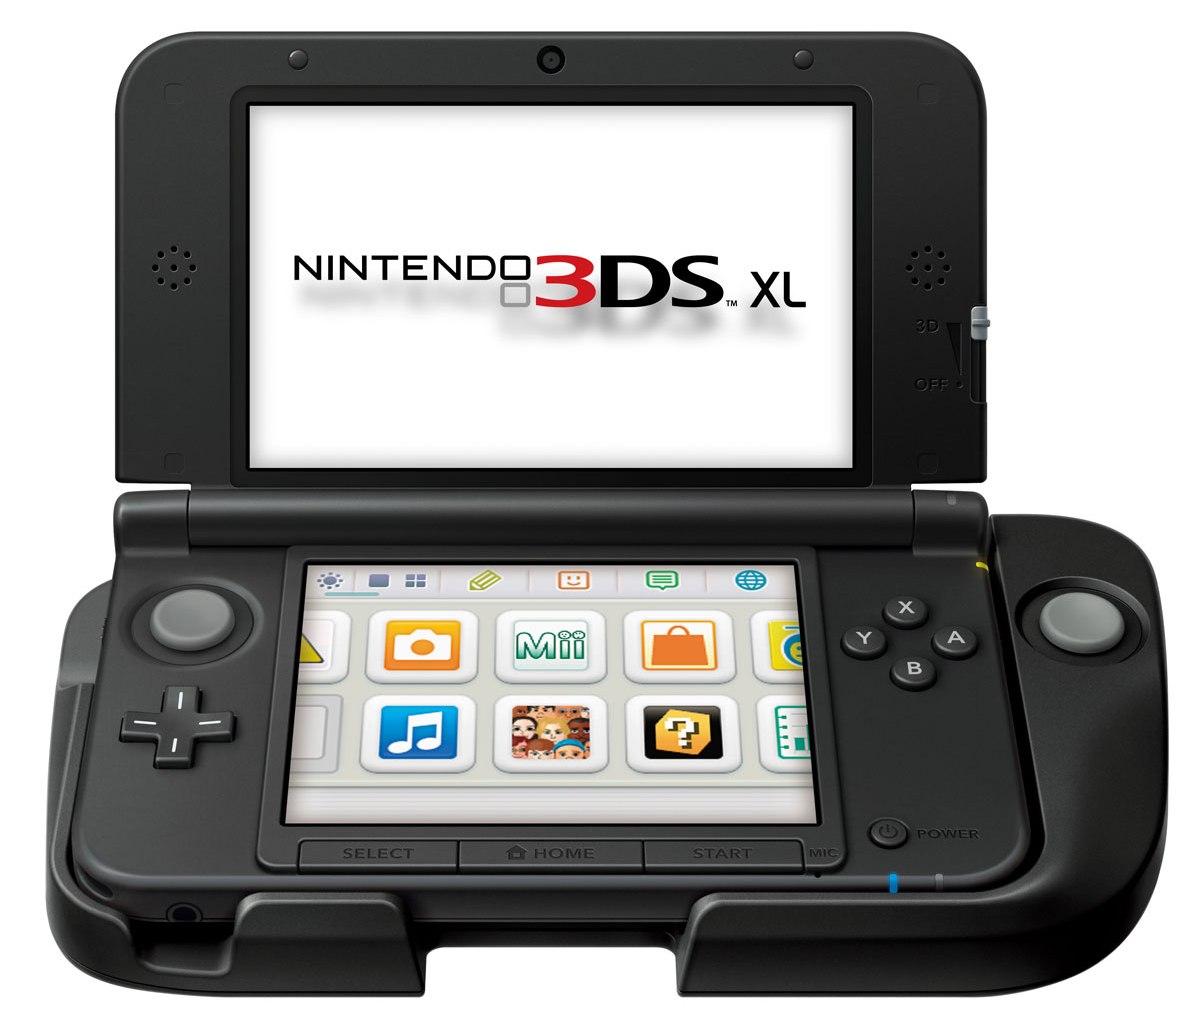 Nintendo Says It Has No Plans To Sell 3DS XL Circle Pad Pro At Retail - My  Nintendo News